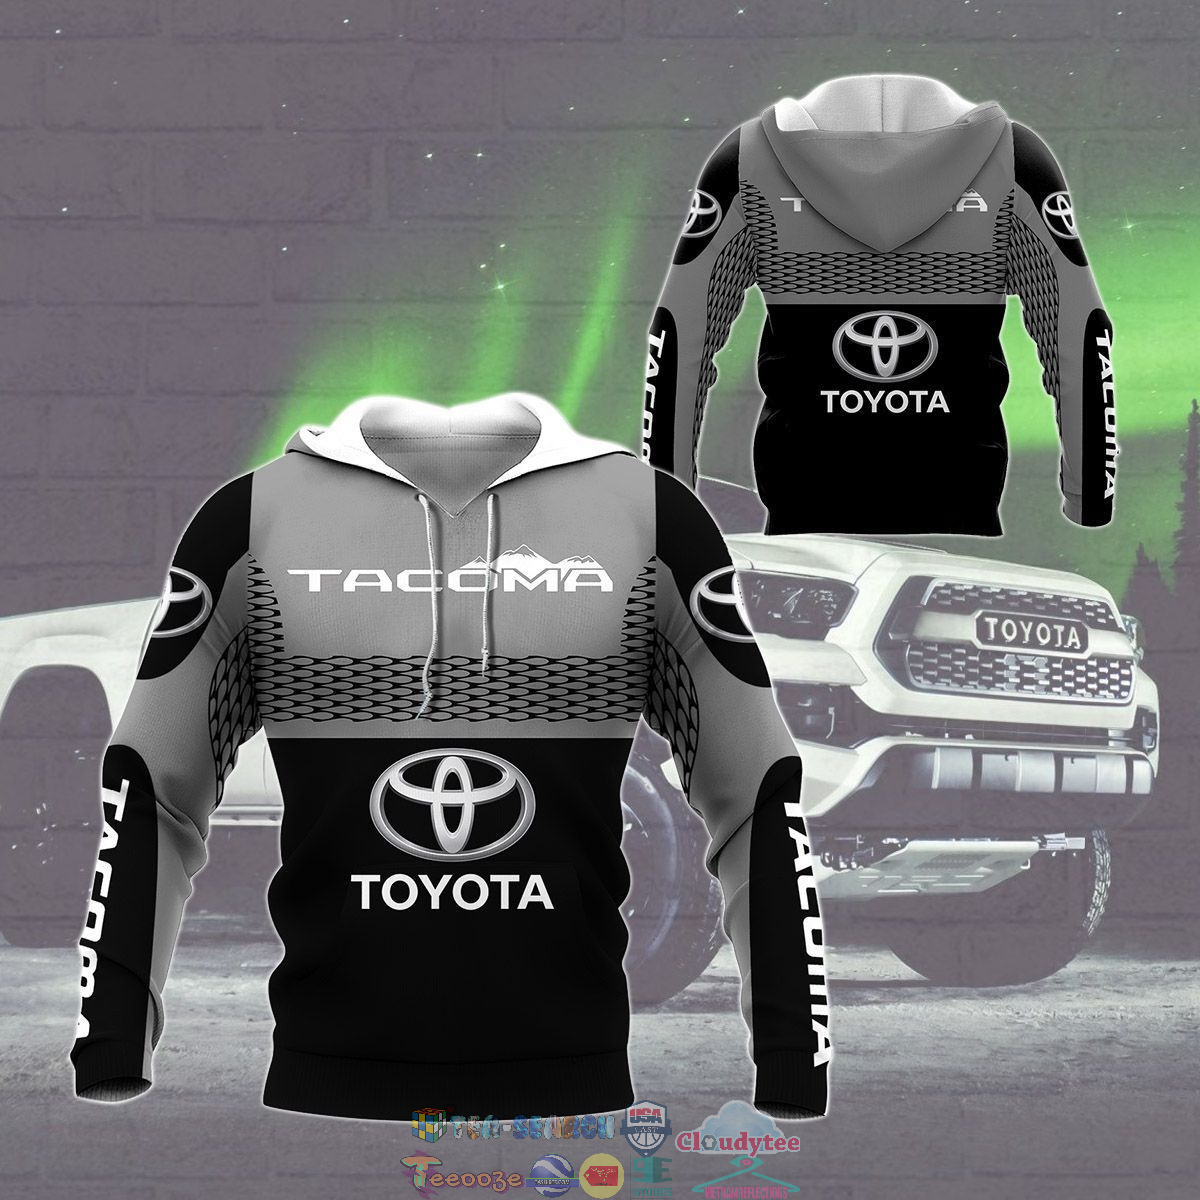 Toyota Tacoma ver 19 3D hoodie and t-shirt